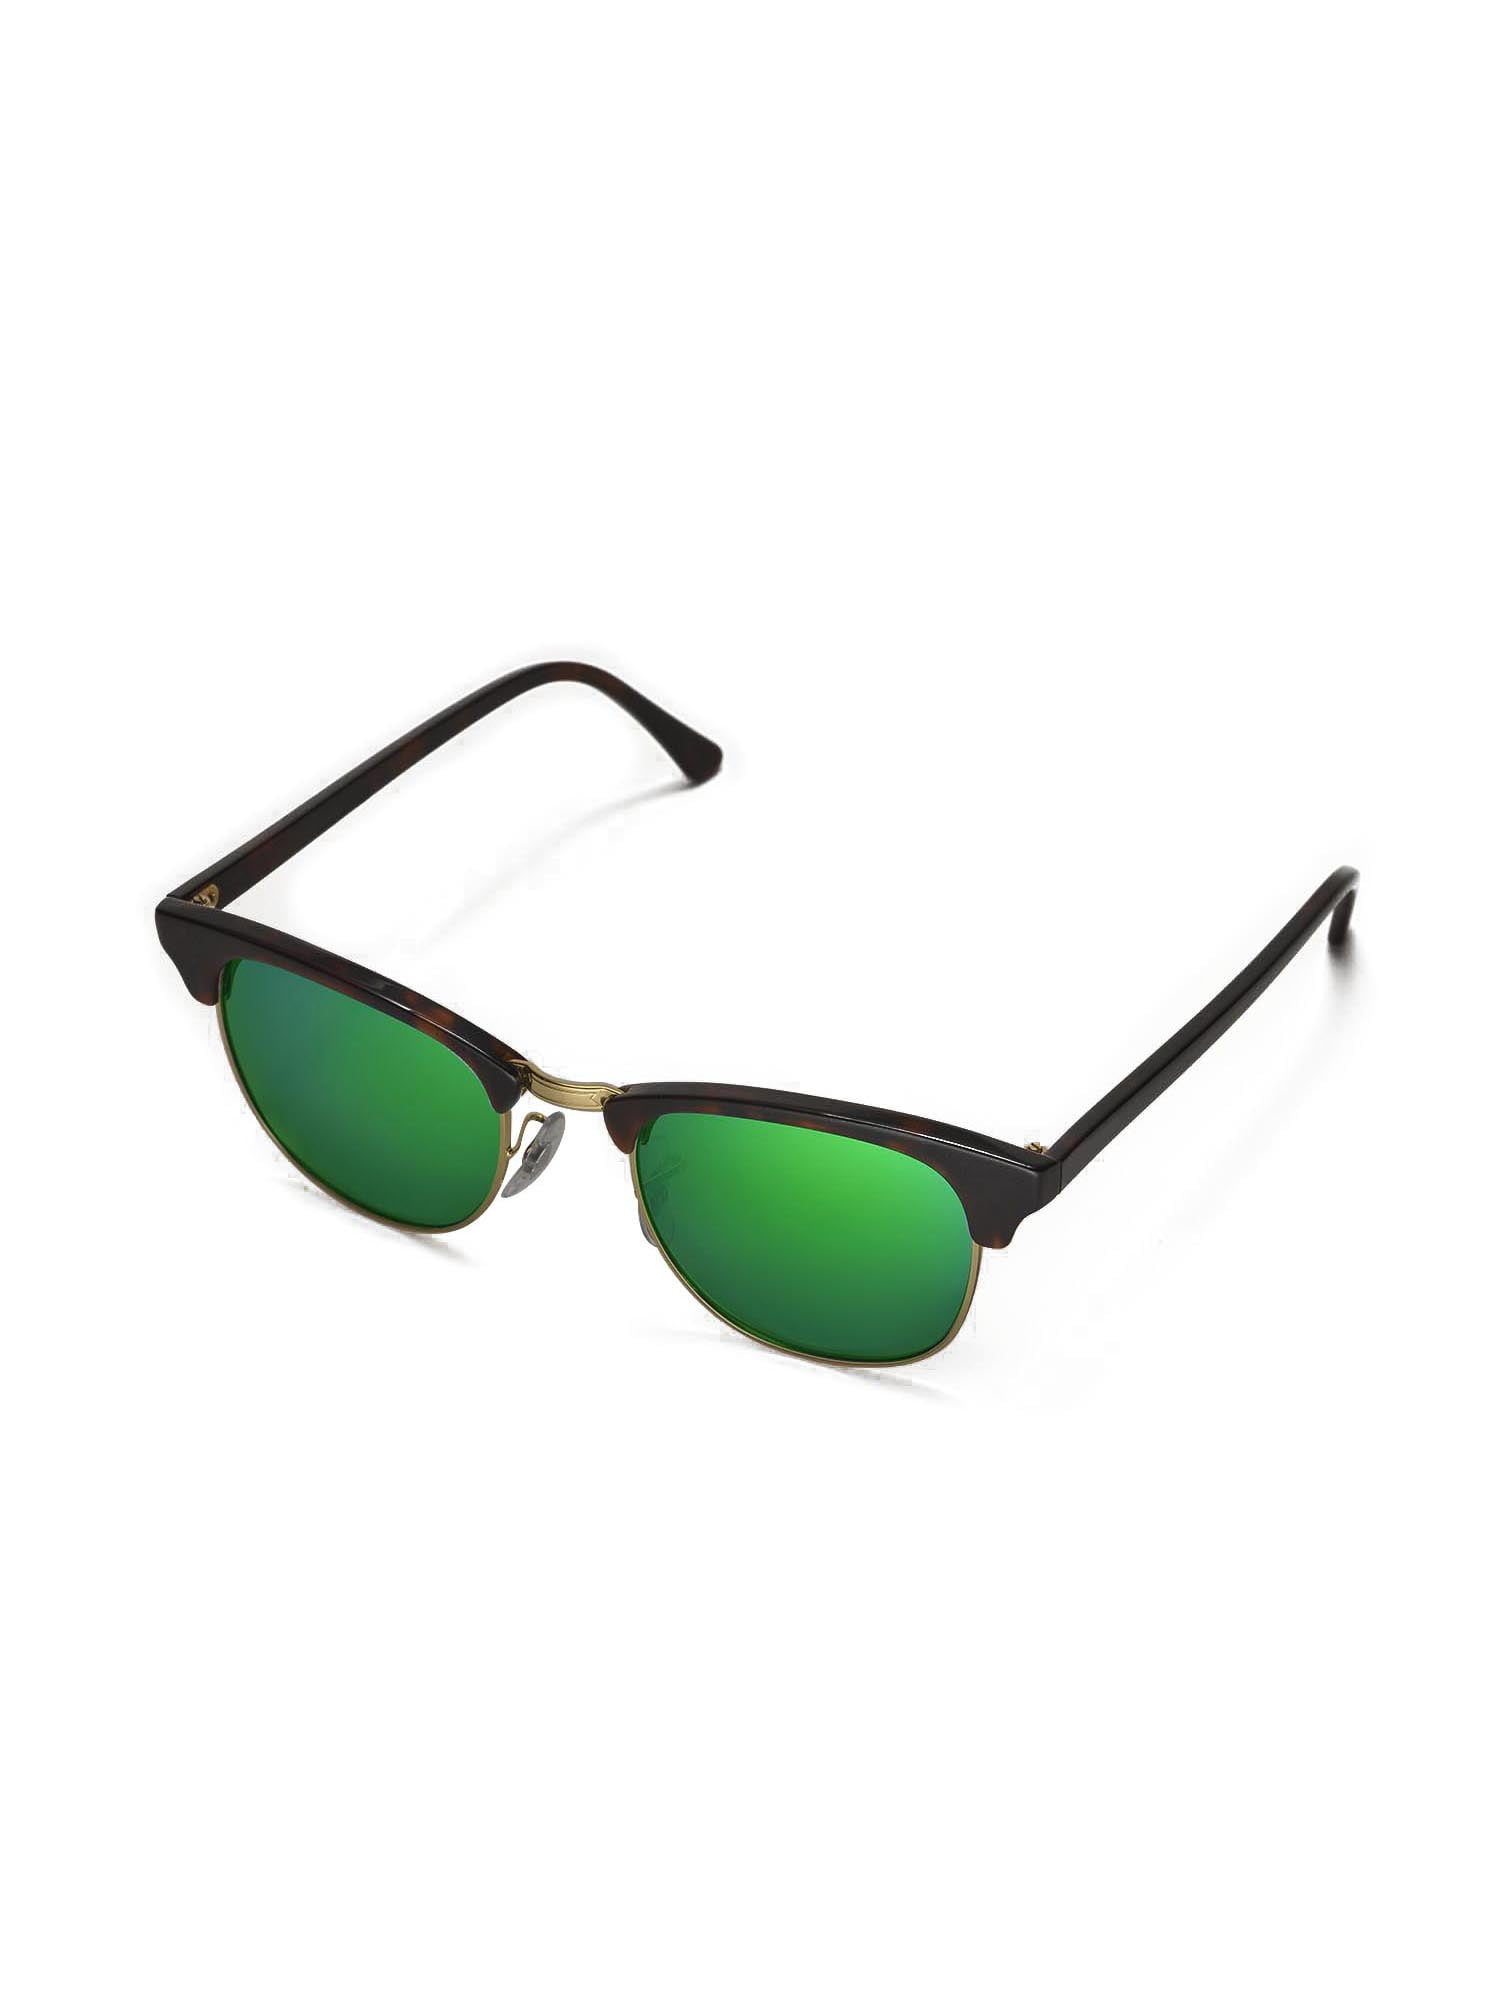 ray ban clubmaster rb3016 replacement lenses